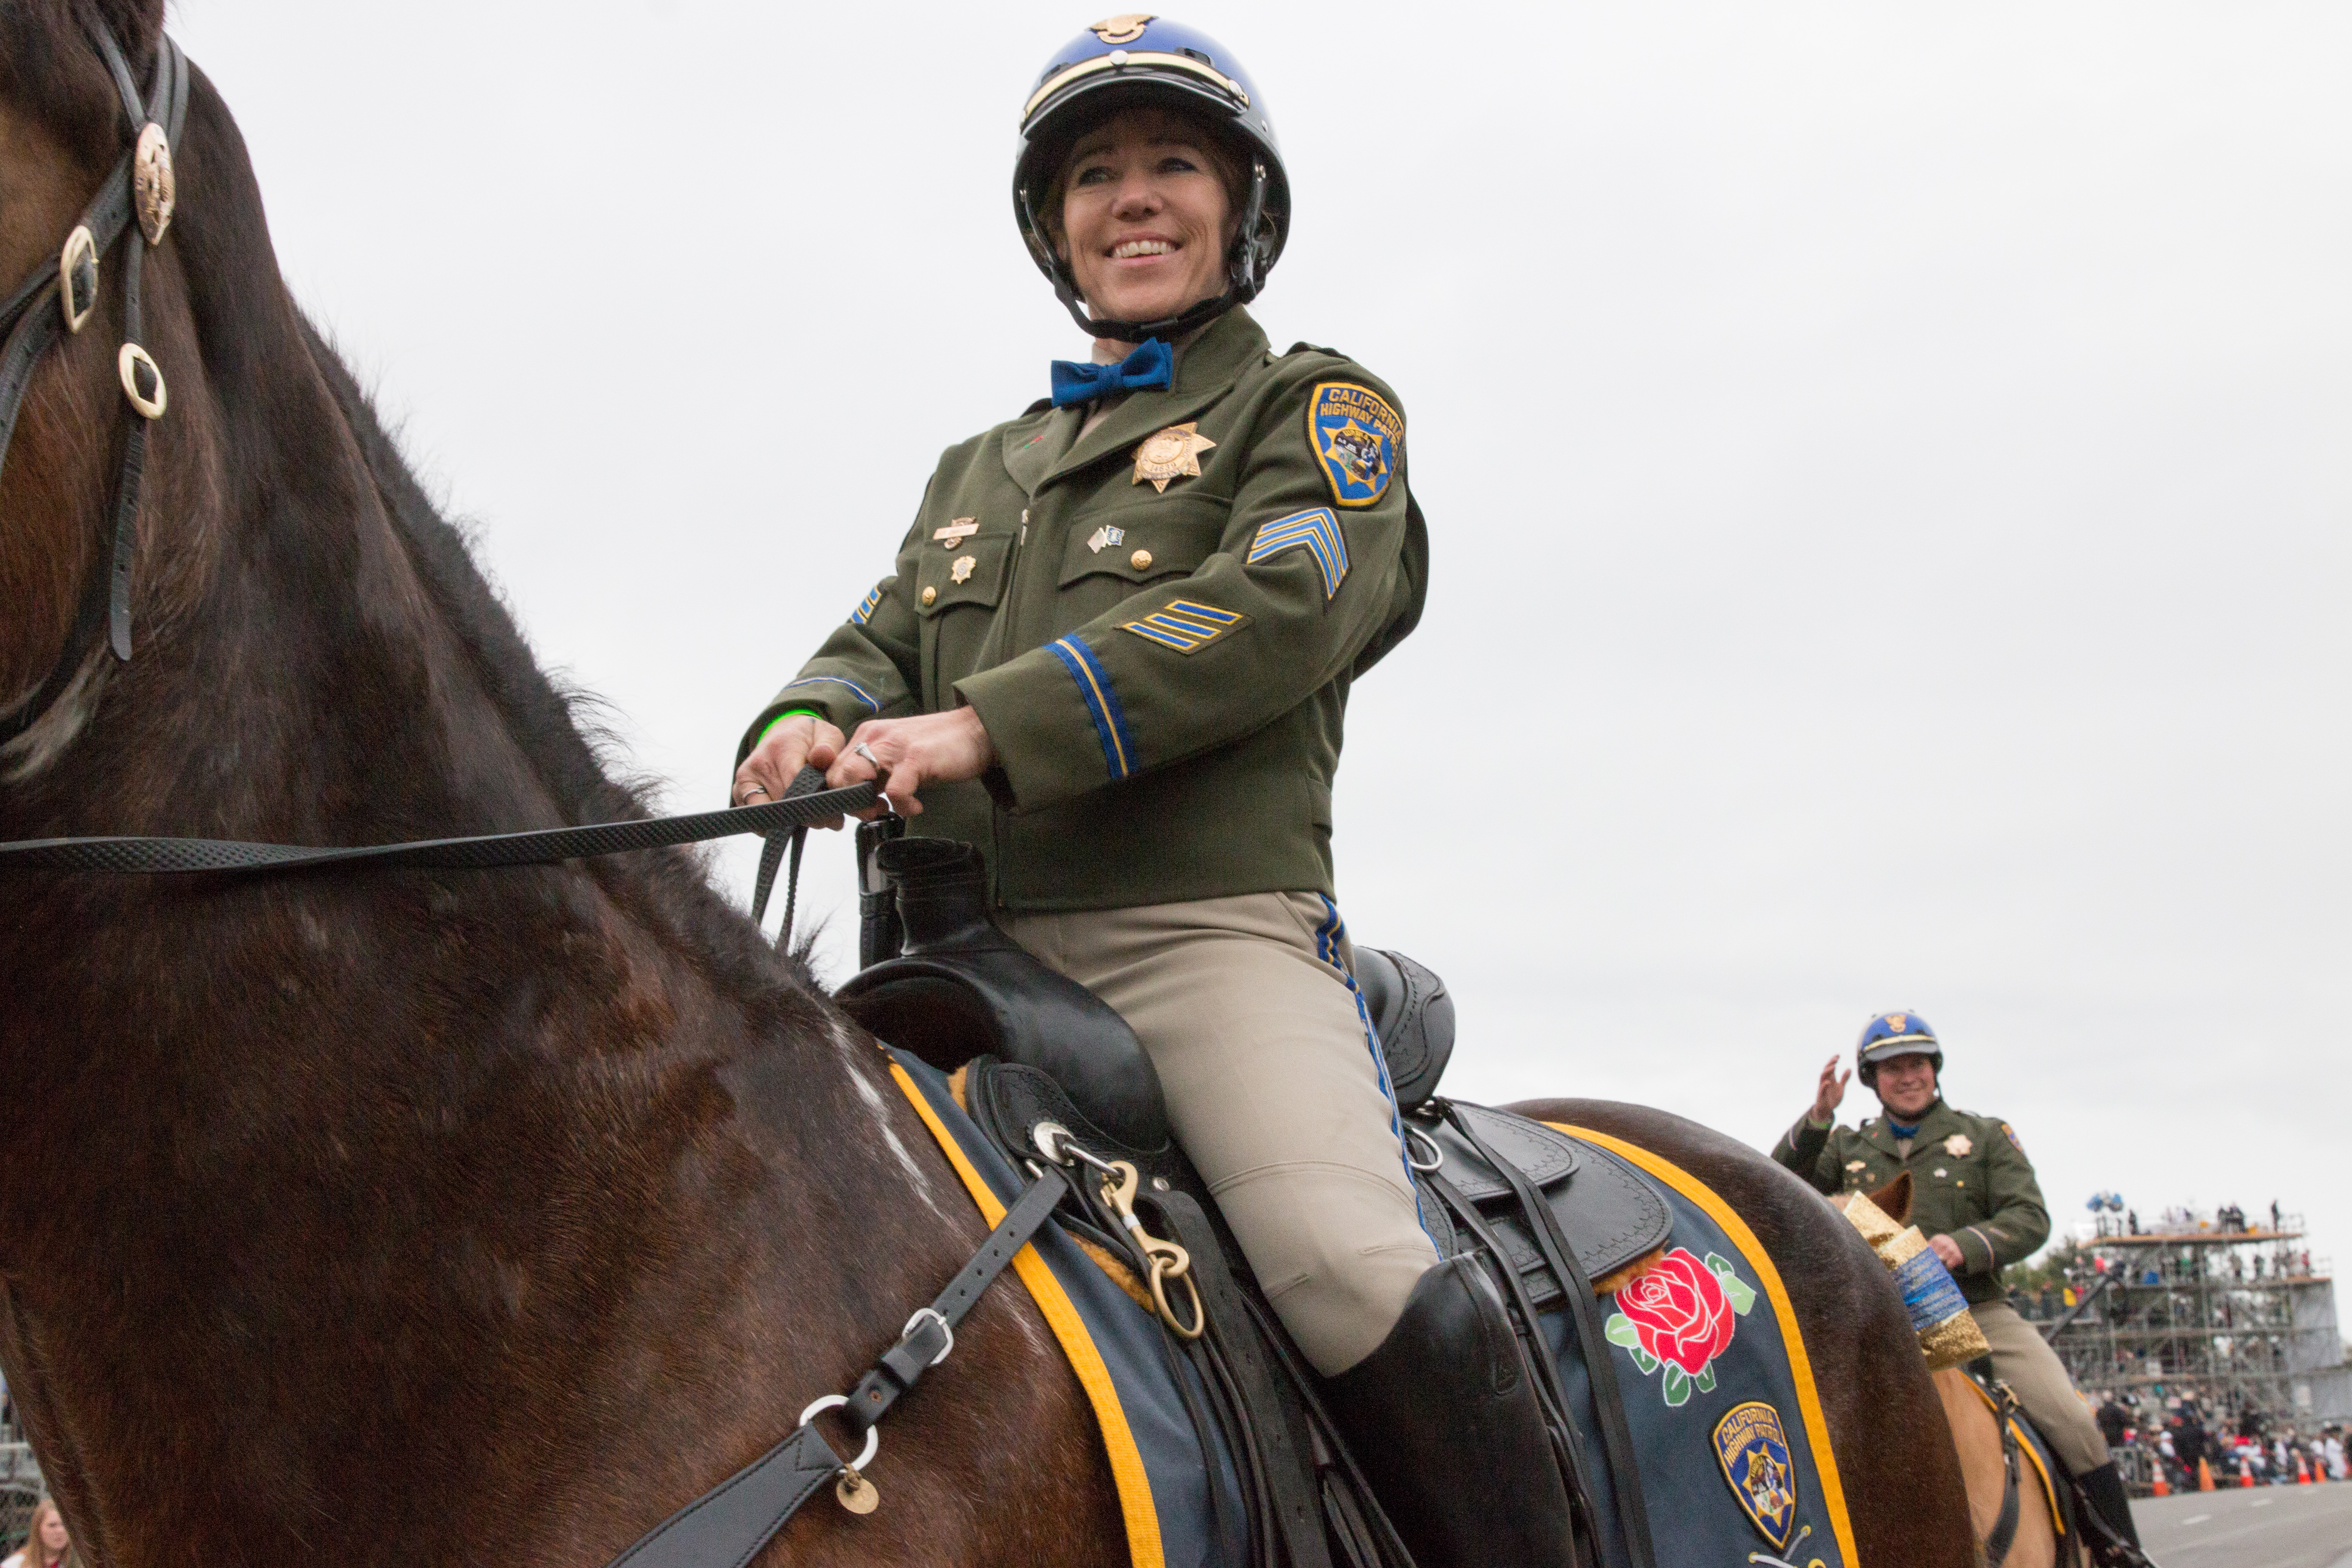 Mounted Unit Officer